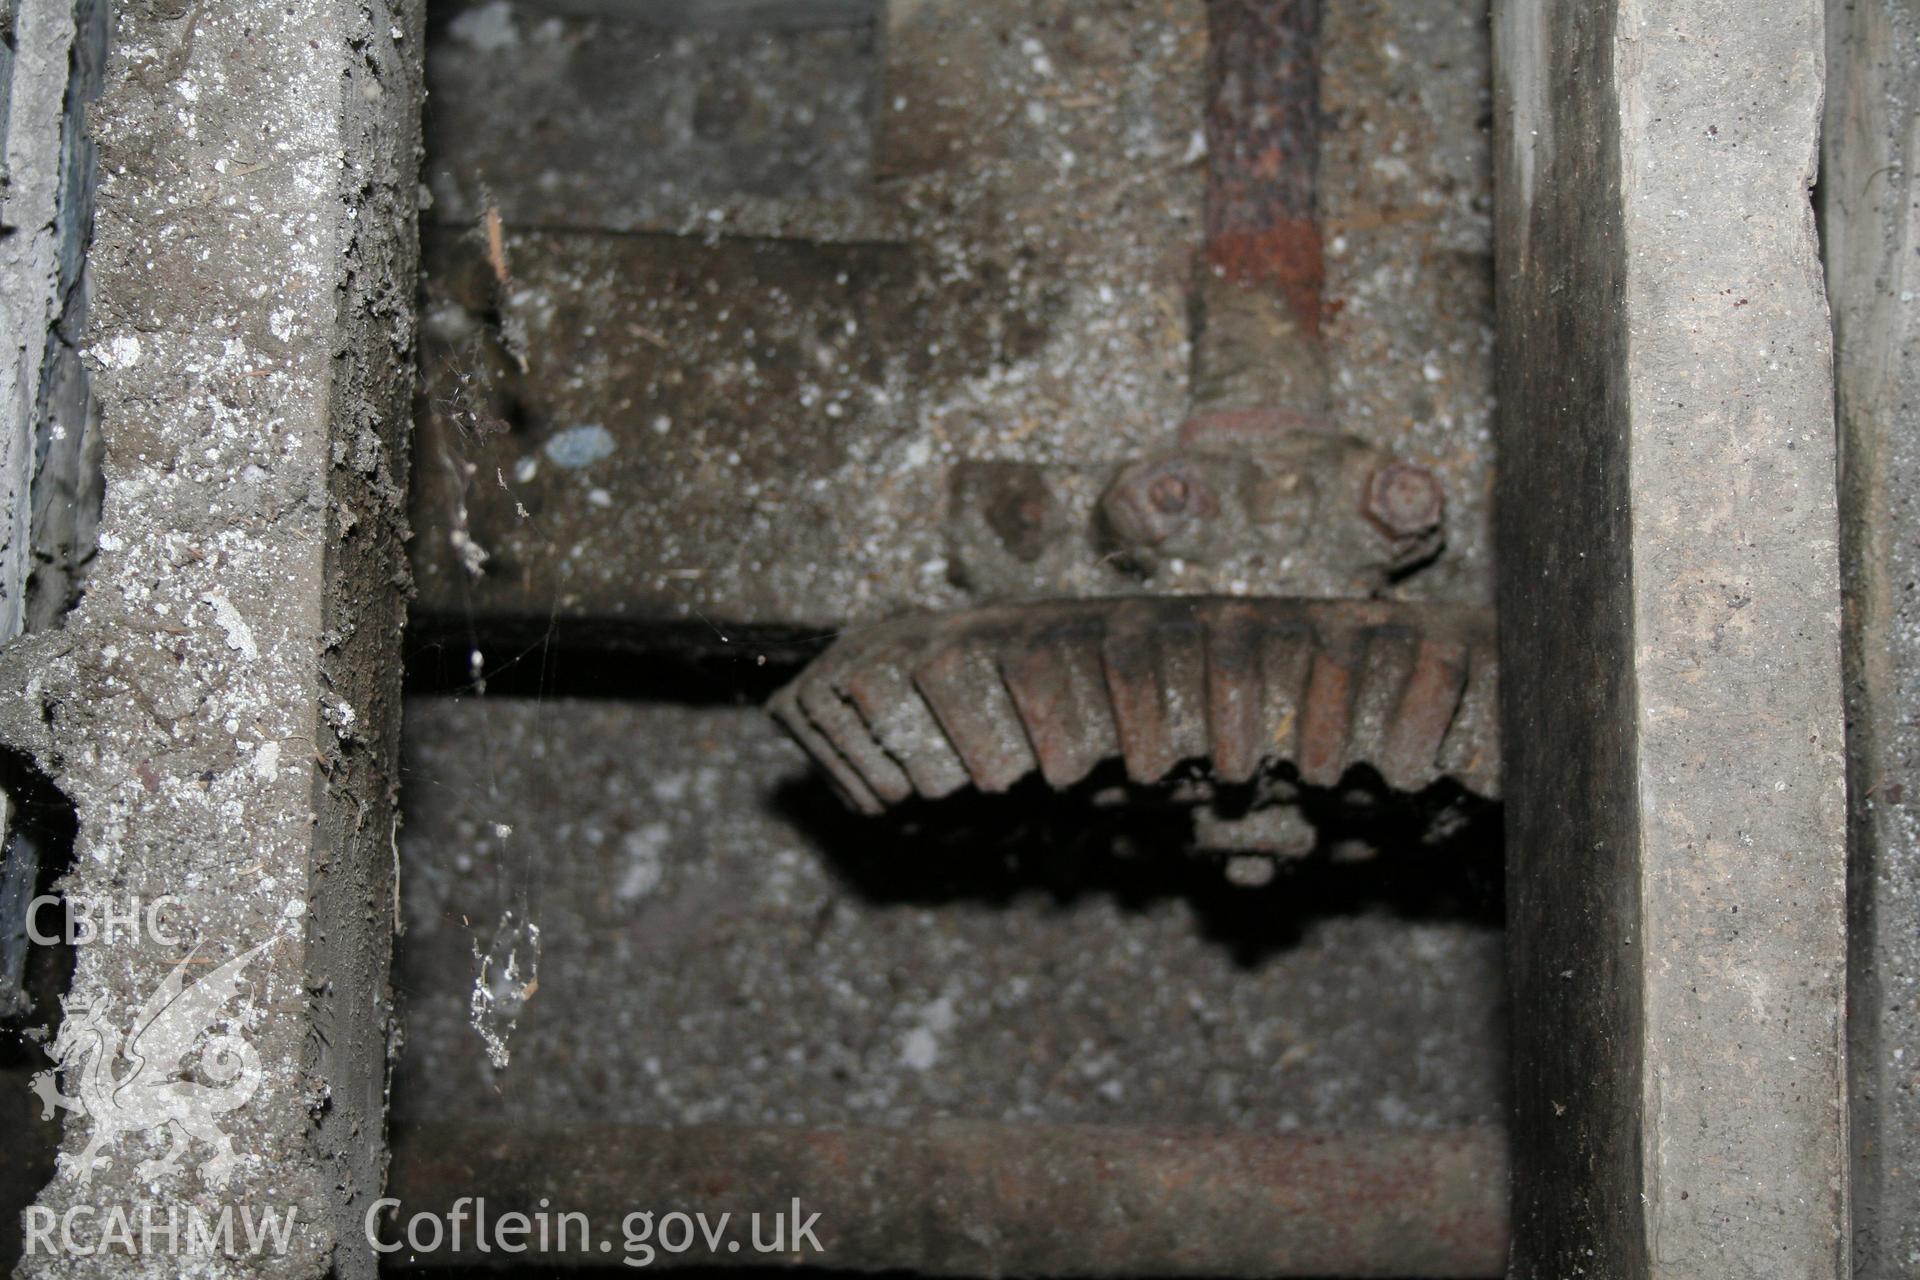 Interior view showing iron cog. Photographic survey of the threshing house, straw house, mixing house and root house at Tan-y-Graig Farm, Llanfarian, conducted by Geoff Ward and John Wiles, 11th December 2006.